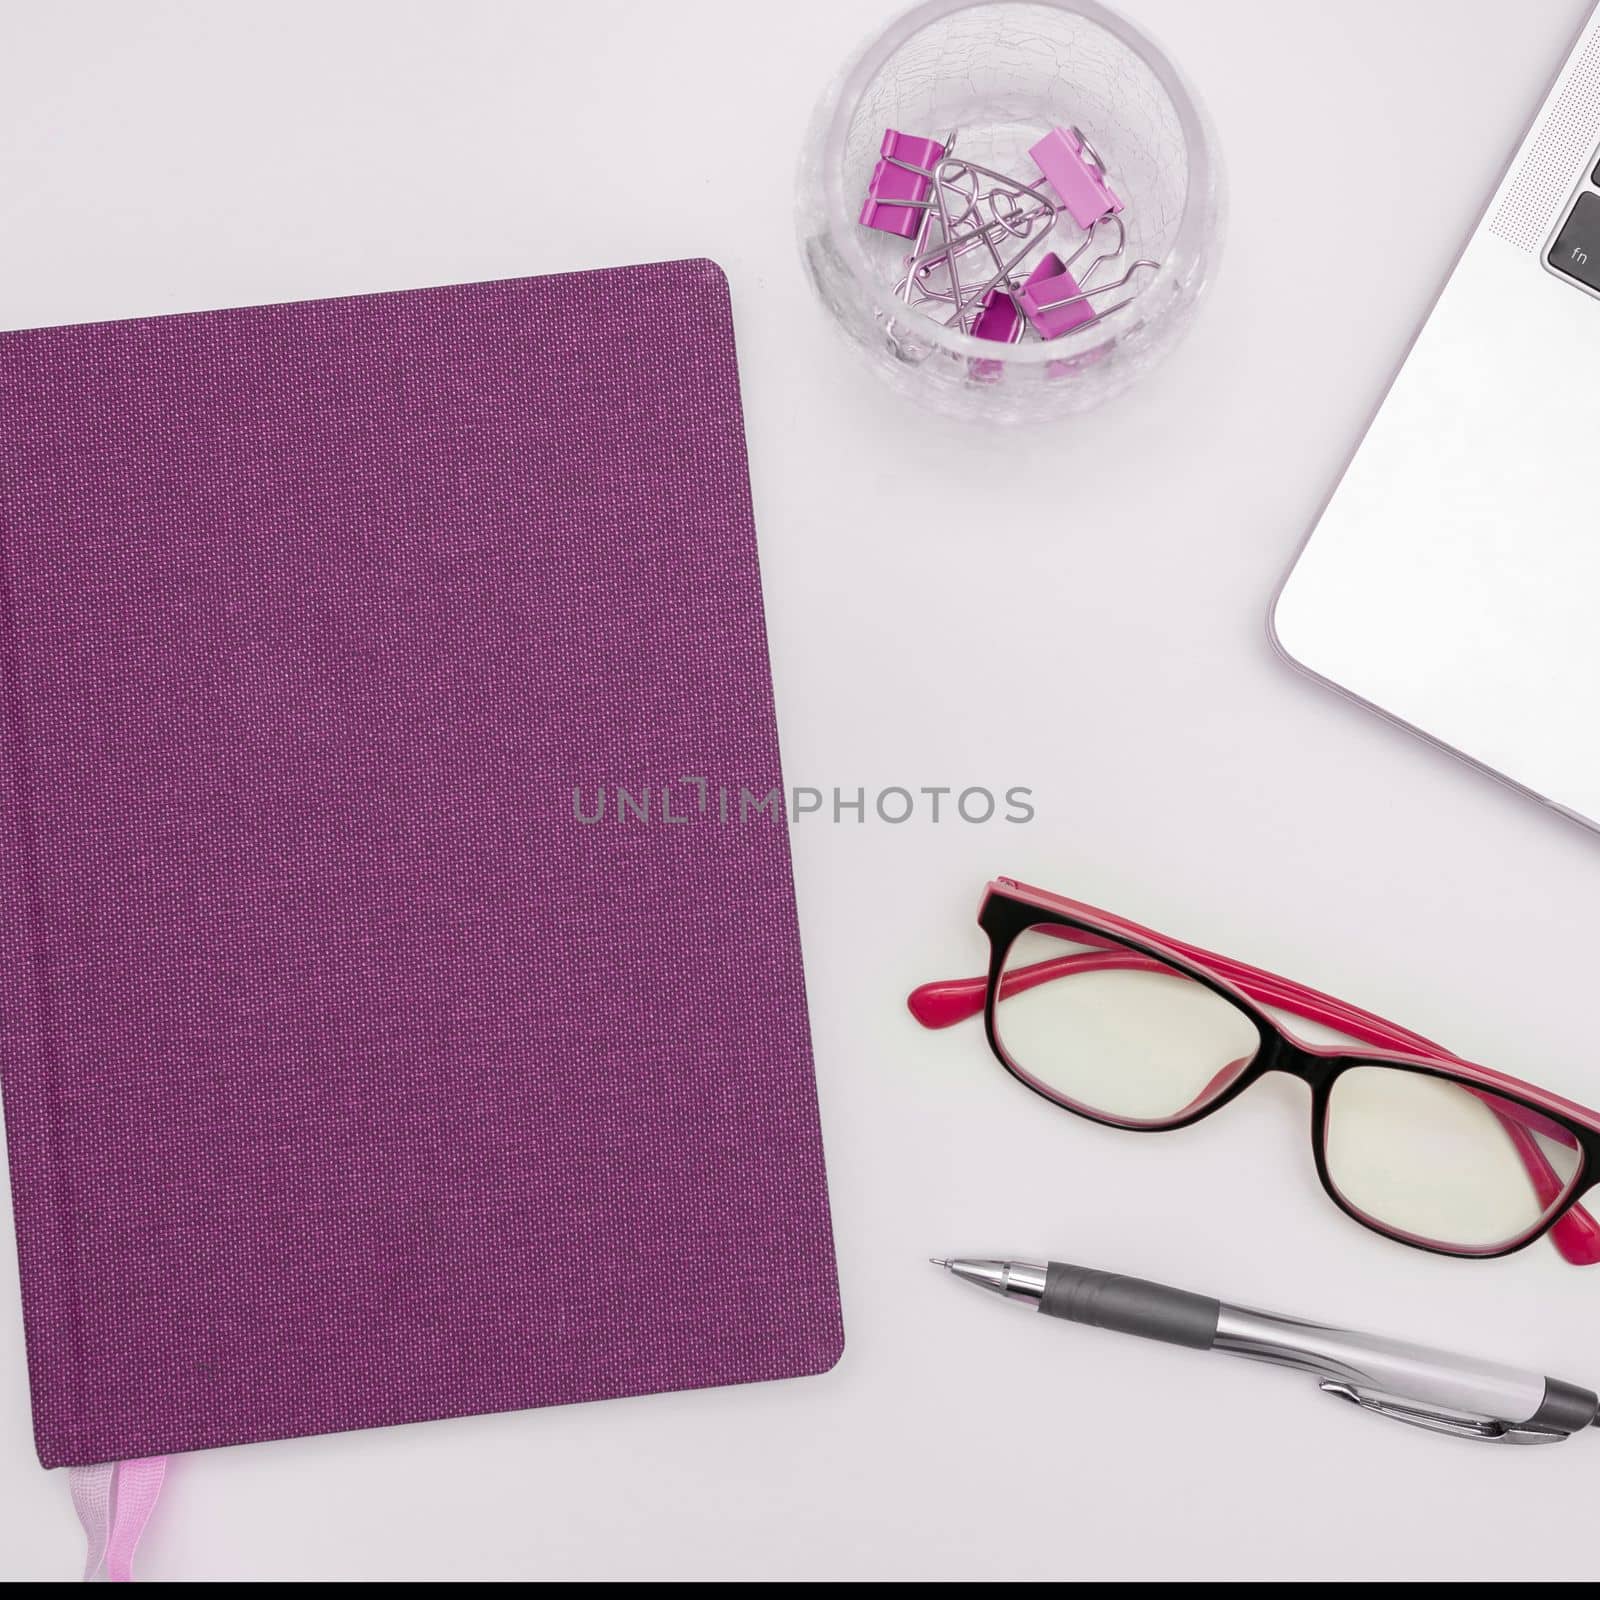 Office Supplies Over Desk. Keyboard and Glasses. Assorted School Utilities